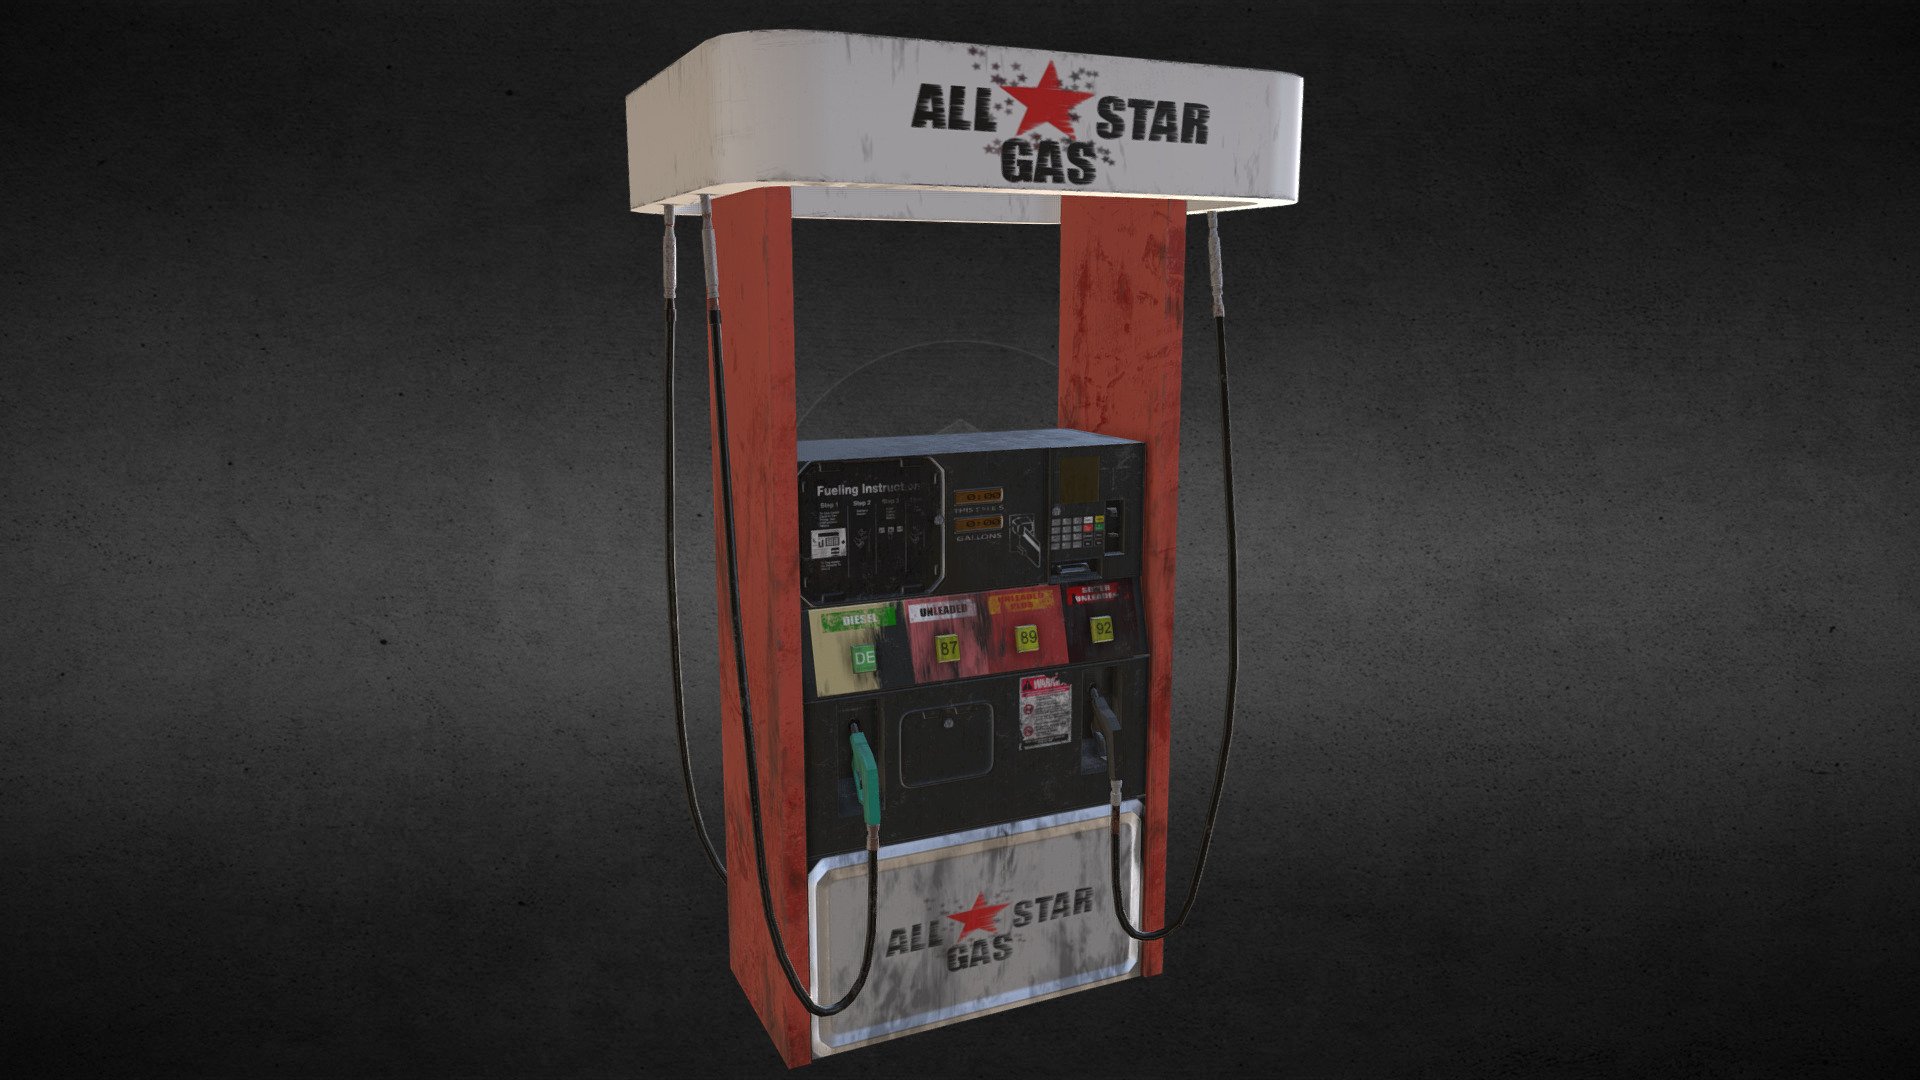 Just a simple gas station pump - Gas Station Pump - 3D model by vinnyhaw 3d model